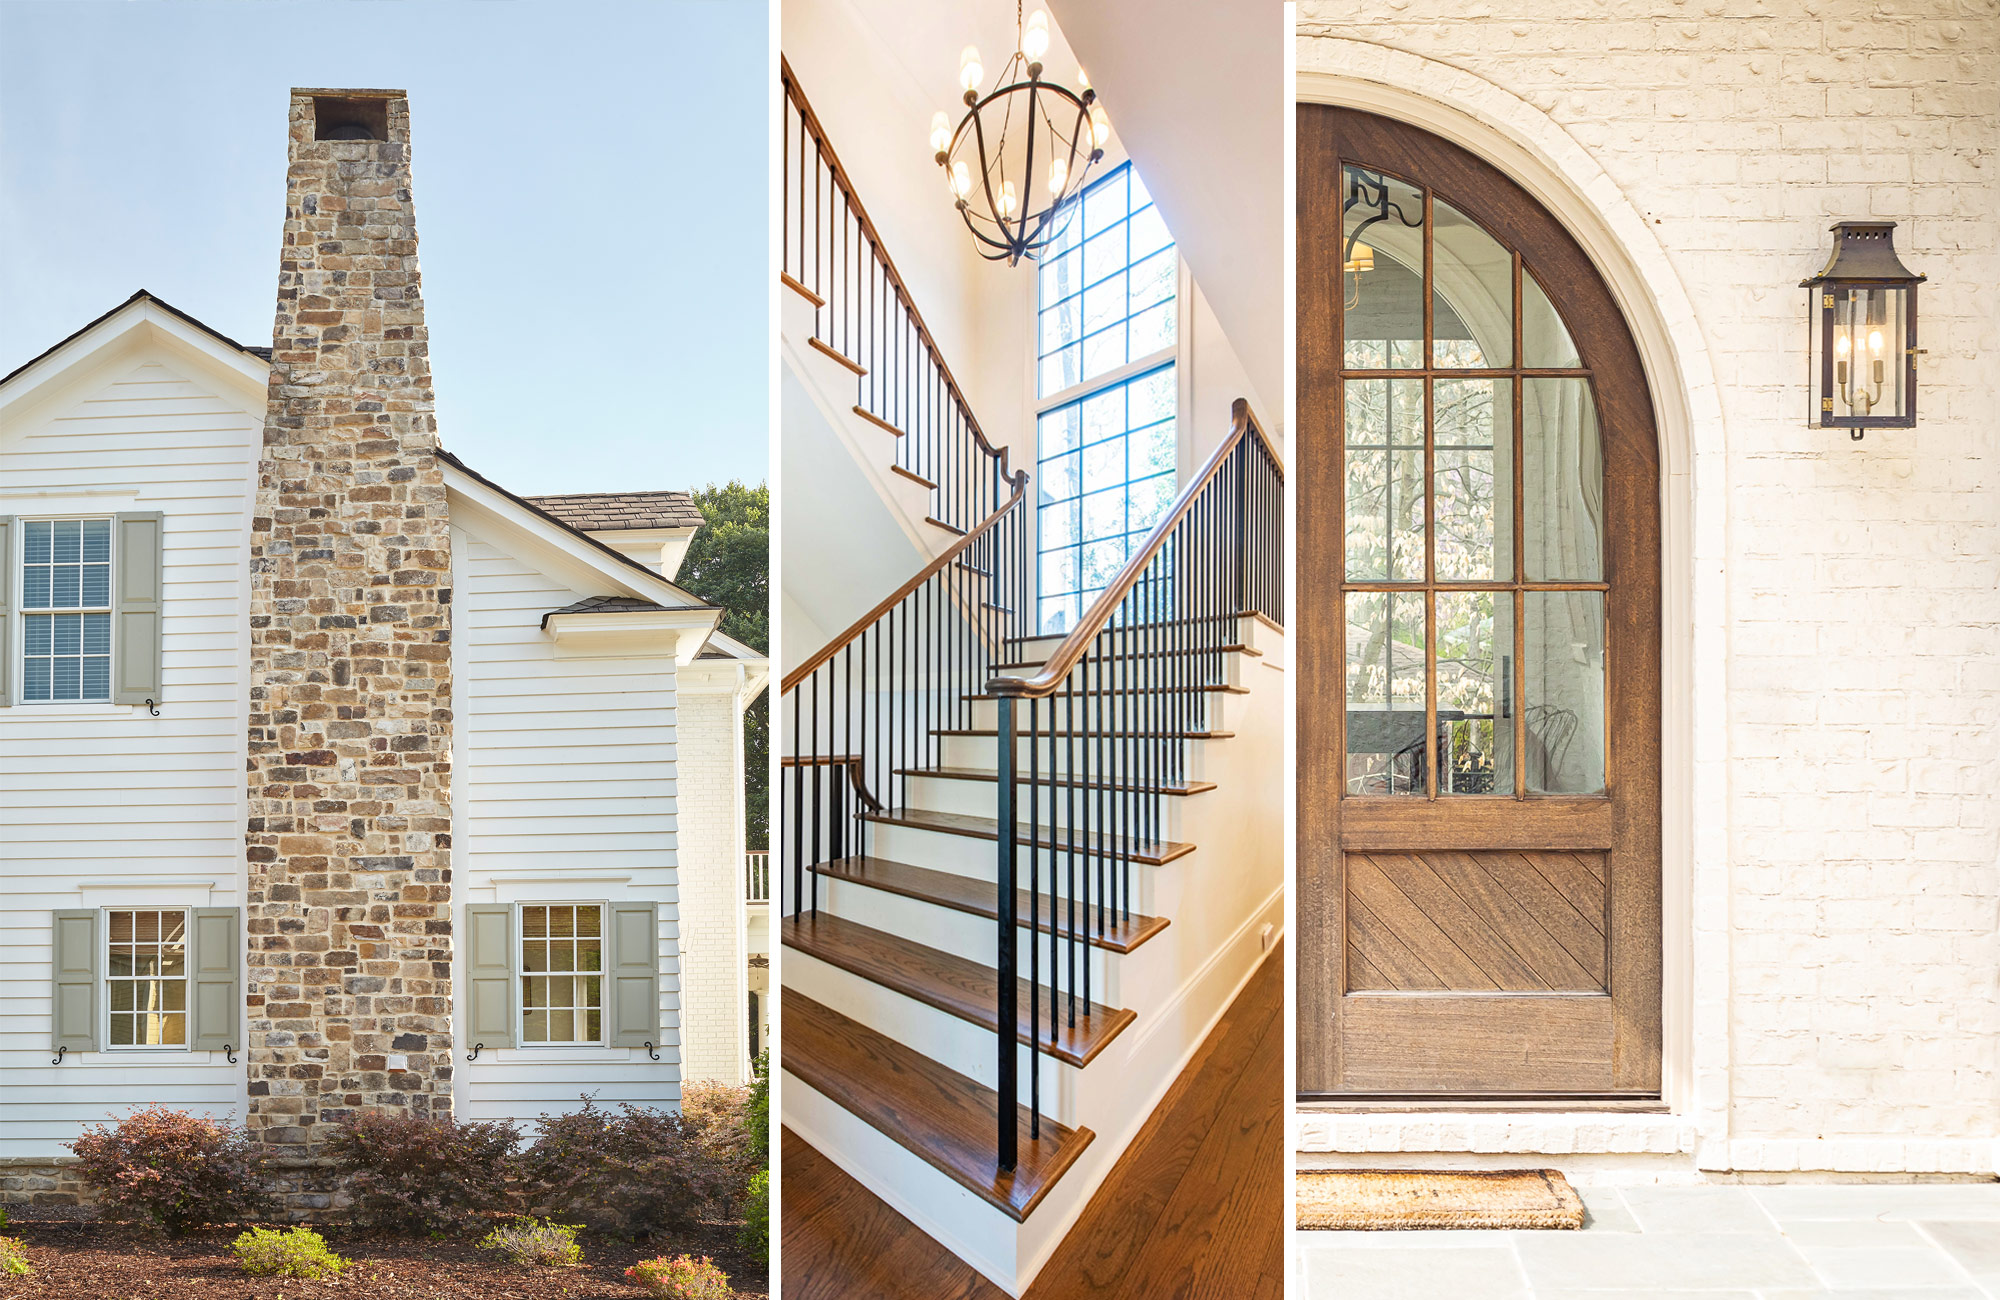 stone chimney, green shutters, mitered corners, painted brick, arched doors, staircase, hardwood floors, bevolo lanterns